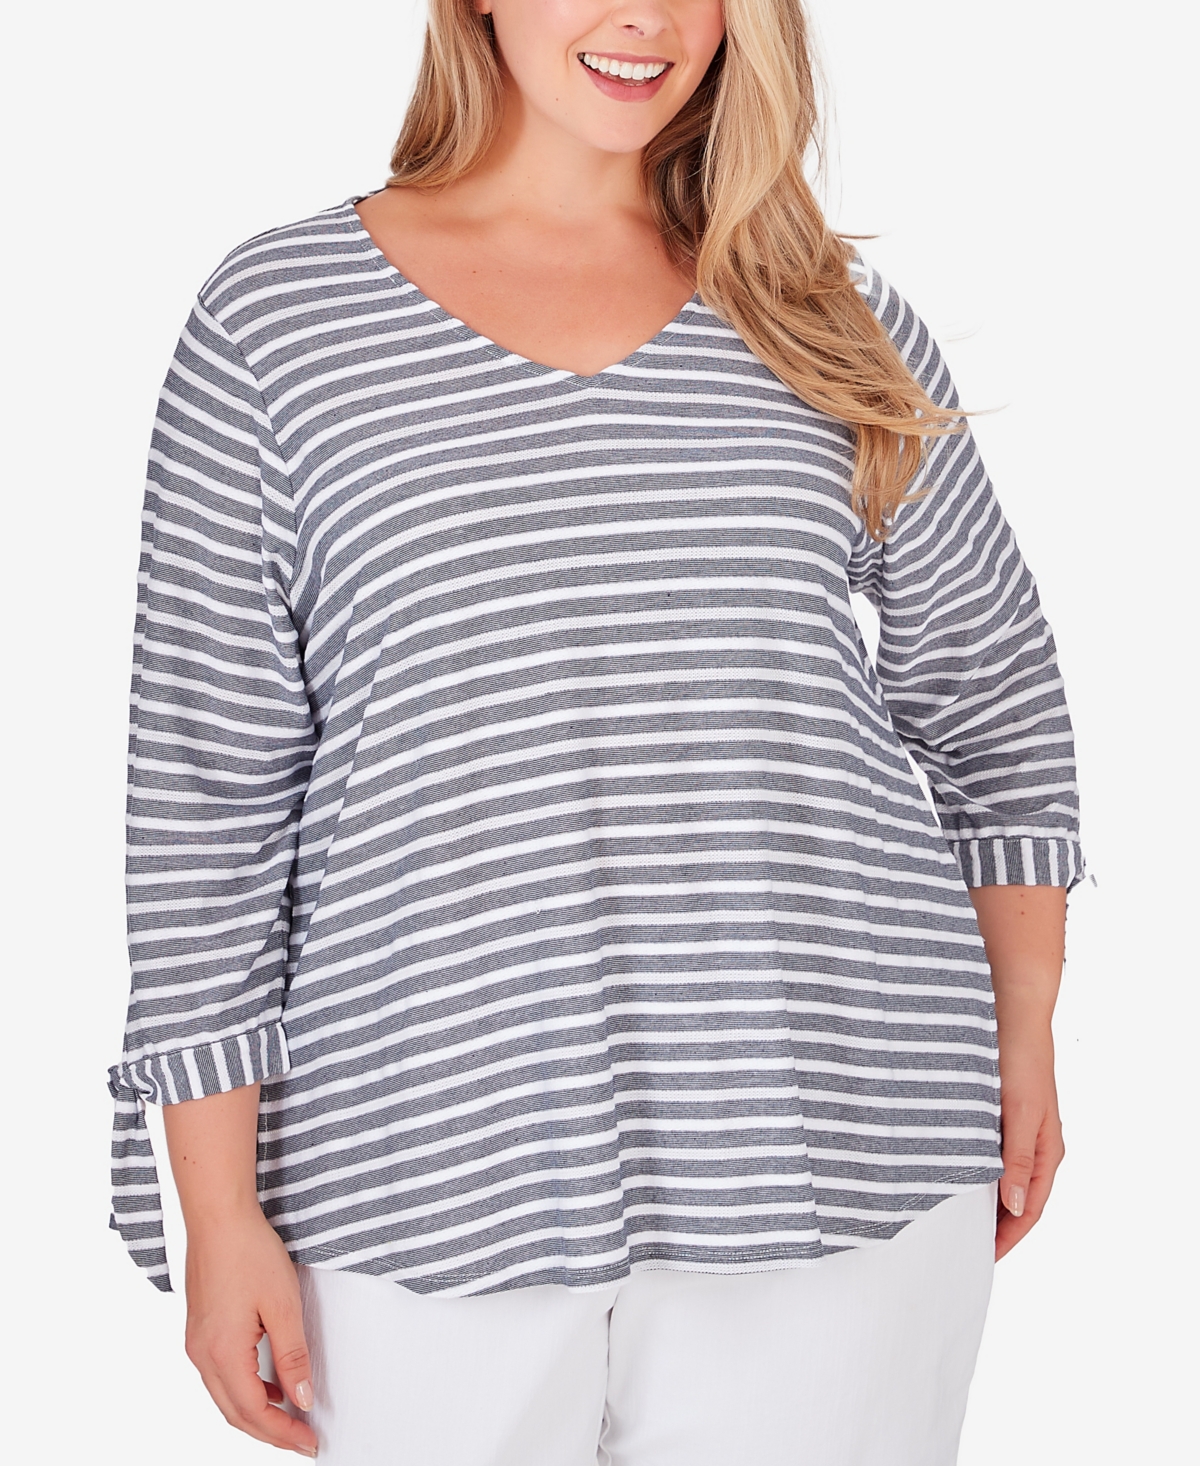 Plus Size V-neck Light Weight Stripe Knit Top with Tie Sleeve Detail - Navy, White